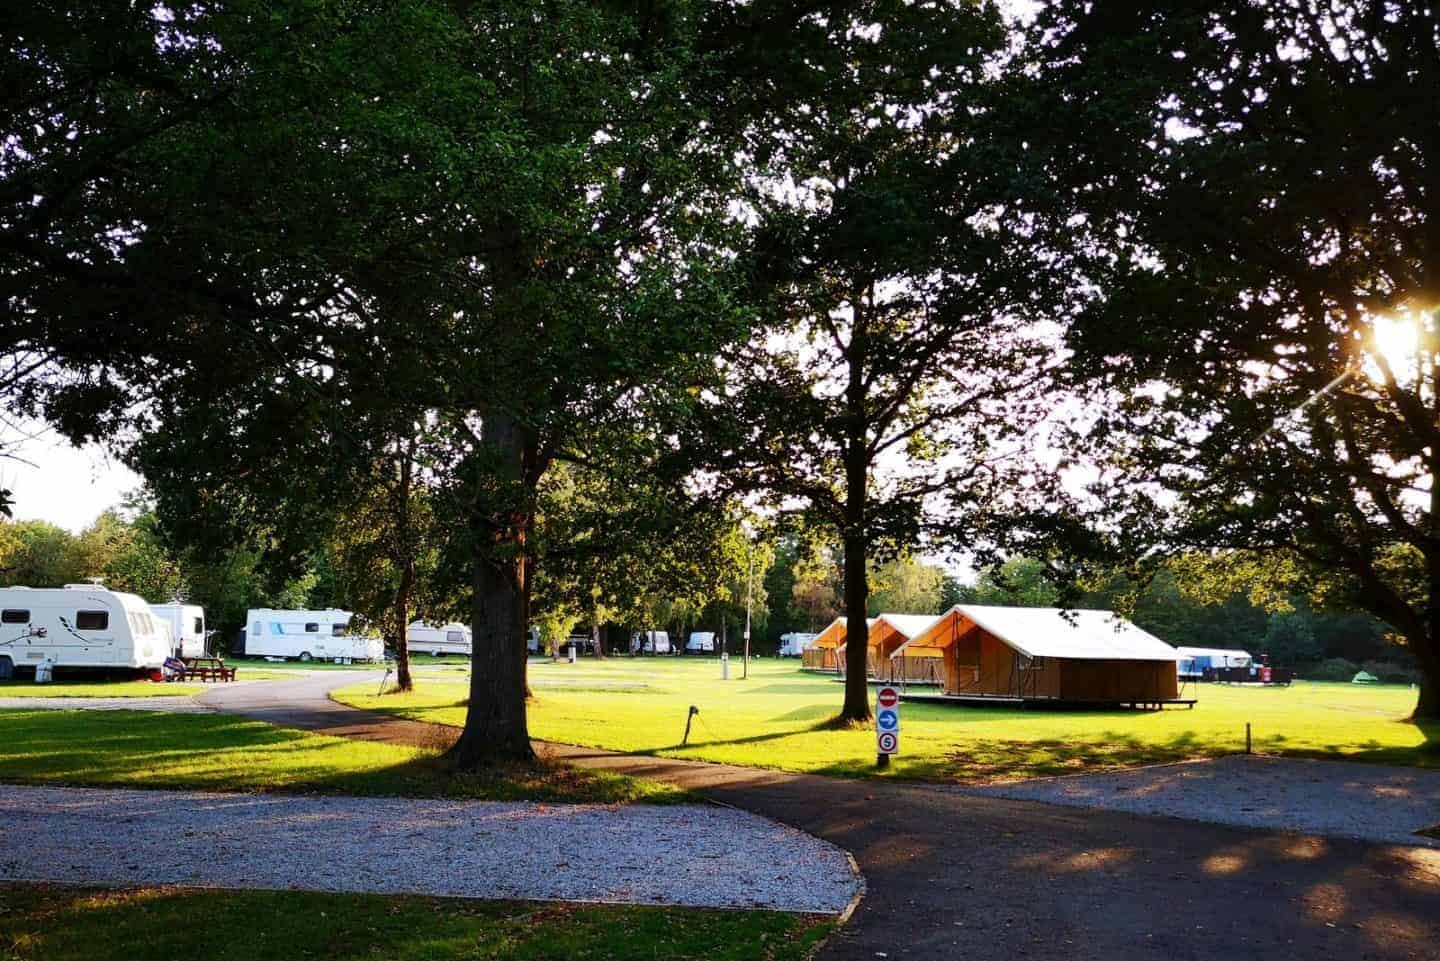 Kevledon Hatch Camping and Caravanning Club Site